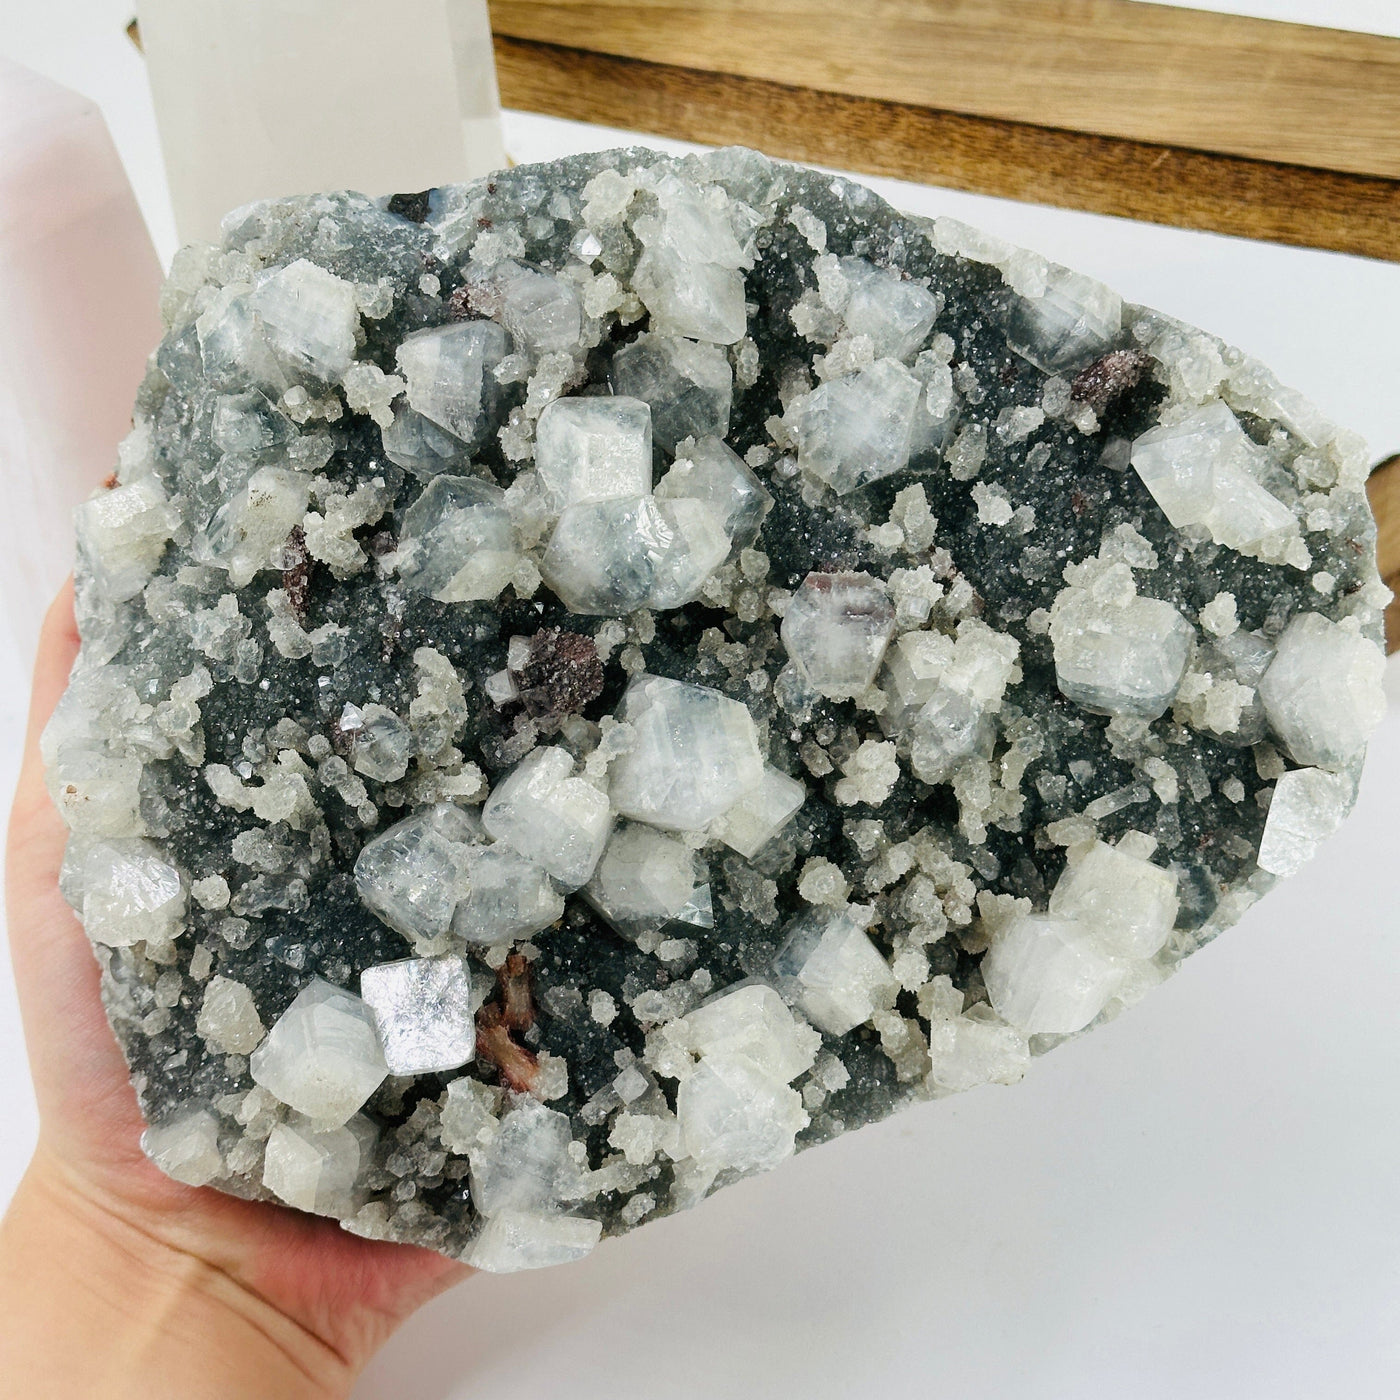 zeolite on matrix with decorations in the background